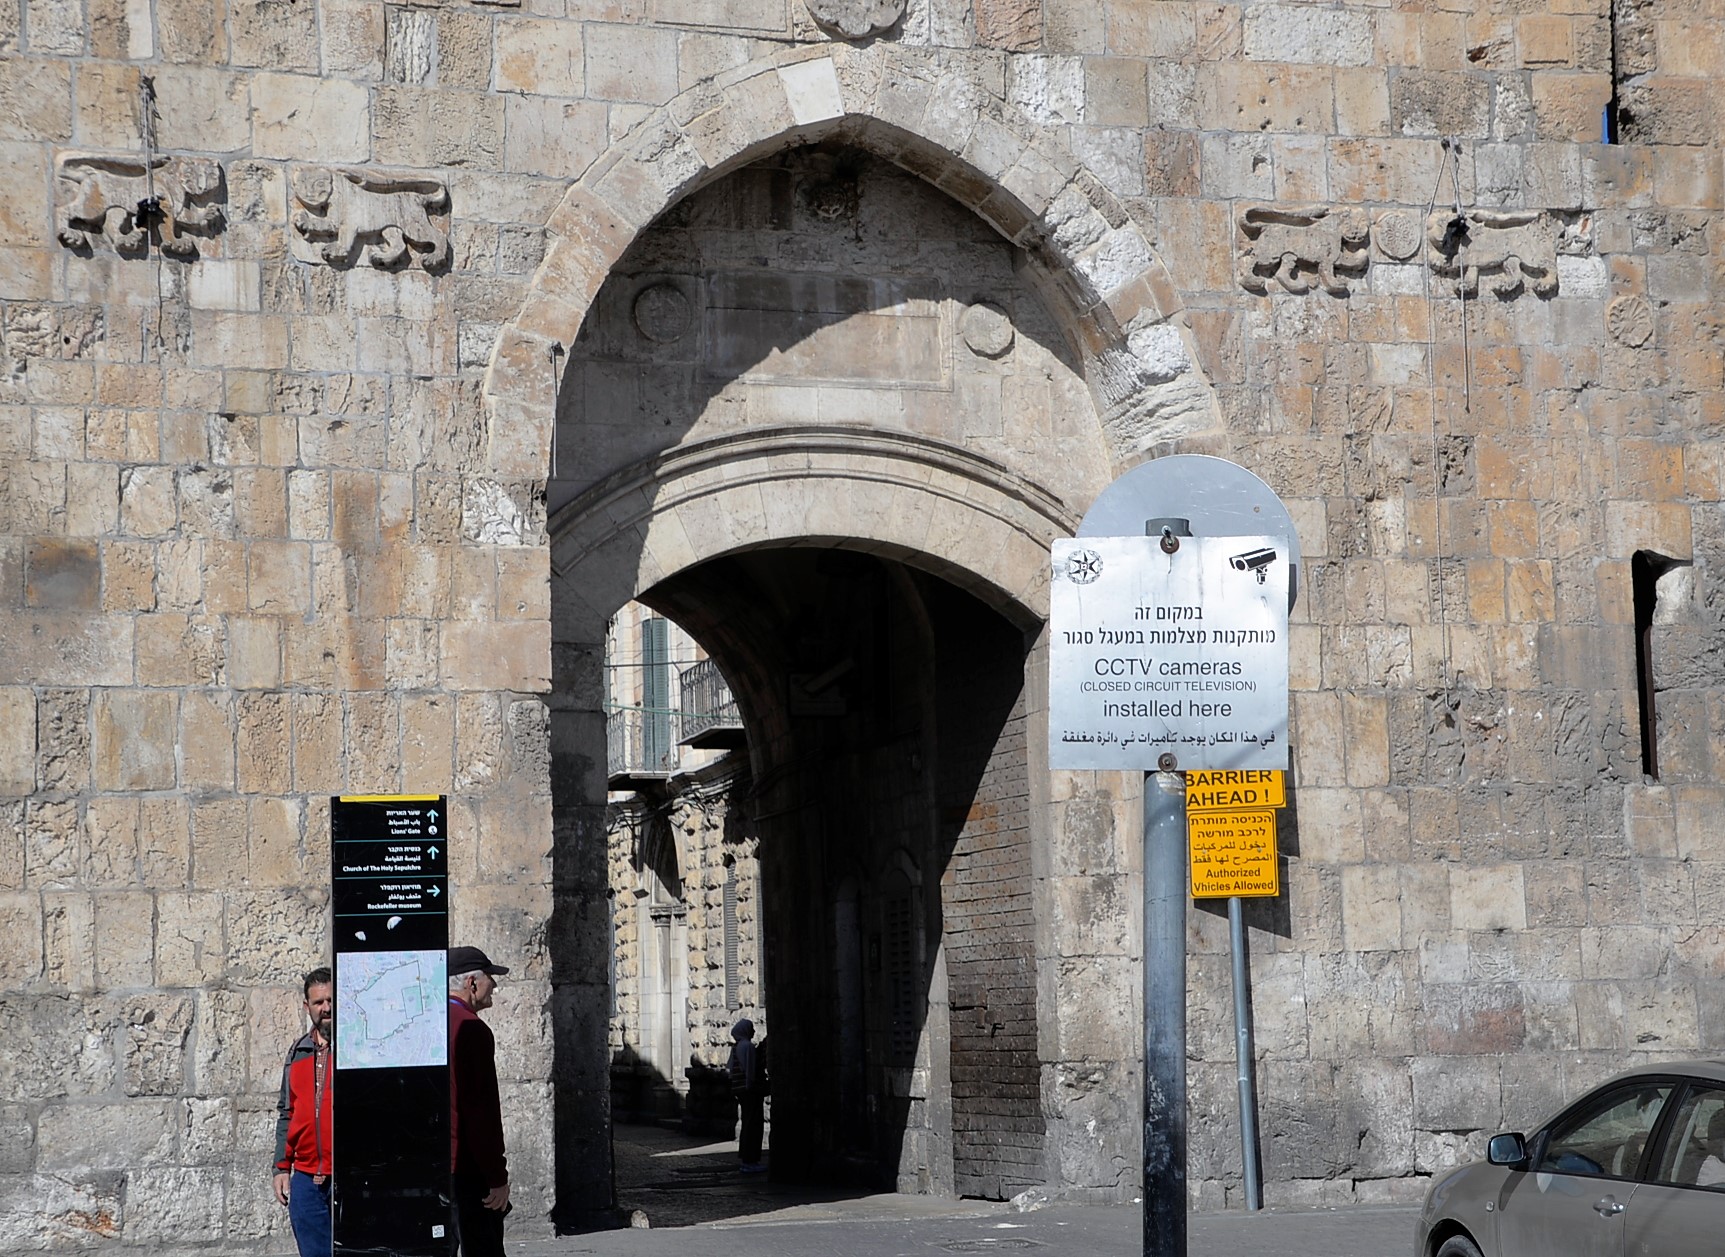 We crossed the Kidron Valley and prepared to enter the Old City through St. Stephen's Gate, also known as The Lion's Gate.